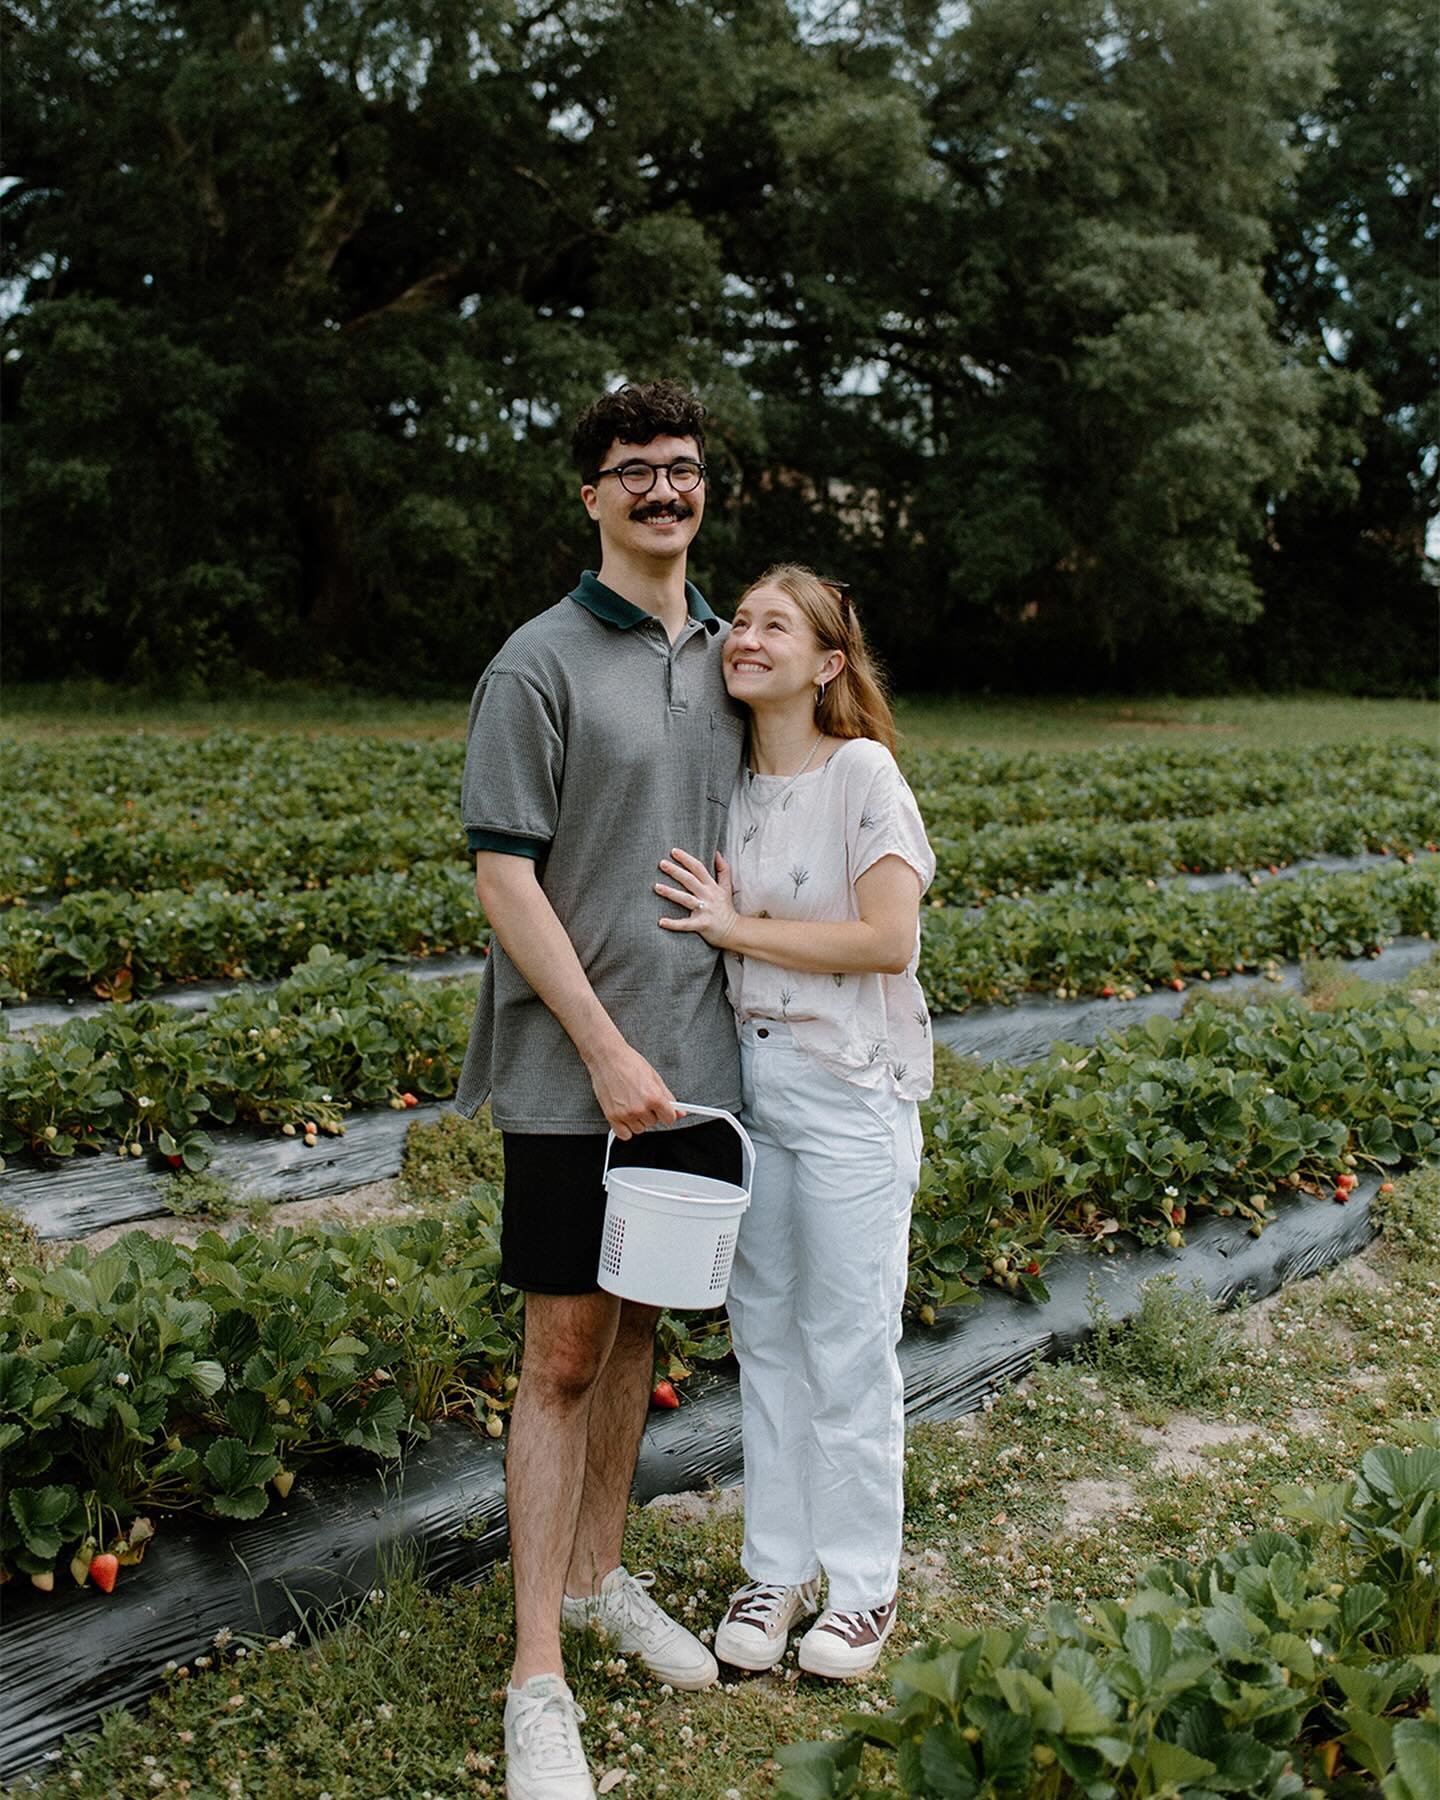 A strawberry field engagement 🍓 top of my list of cutest proposals to date, with the most adorable couple. It is hard to be sneaky when your friends get engaged but I think we did pretty good. So happy for Michael + Sam. Especially getting to be apa